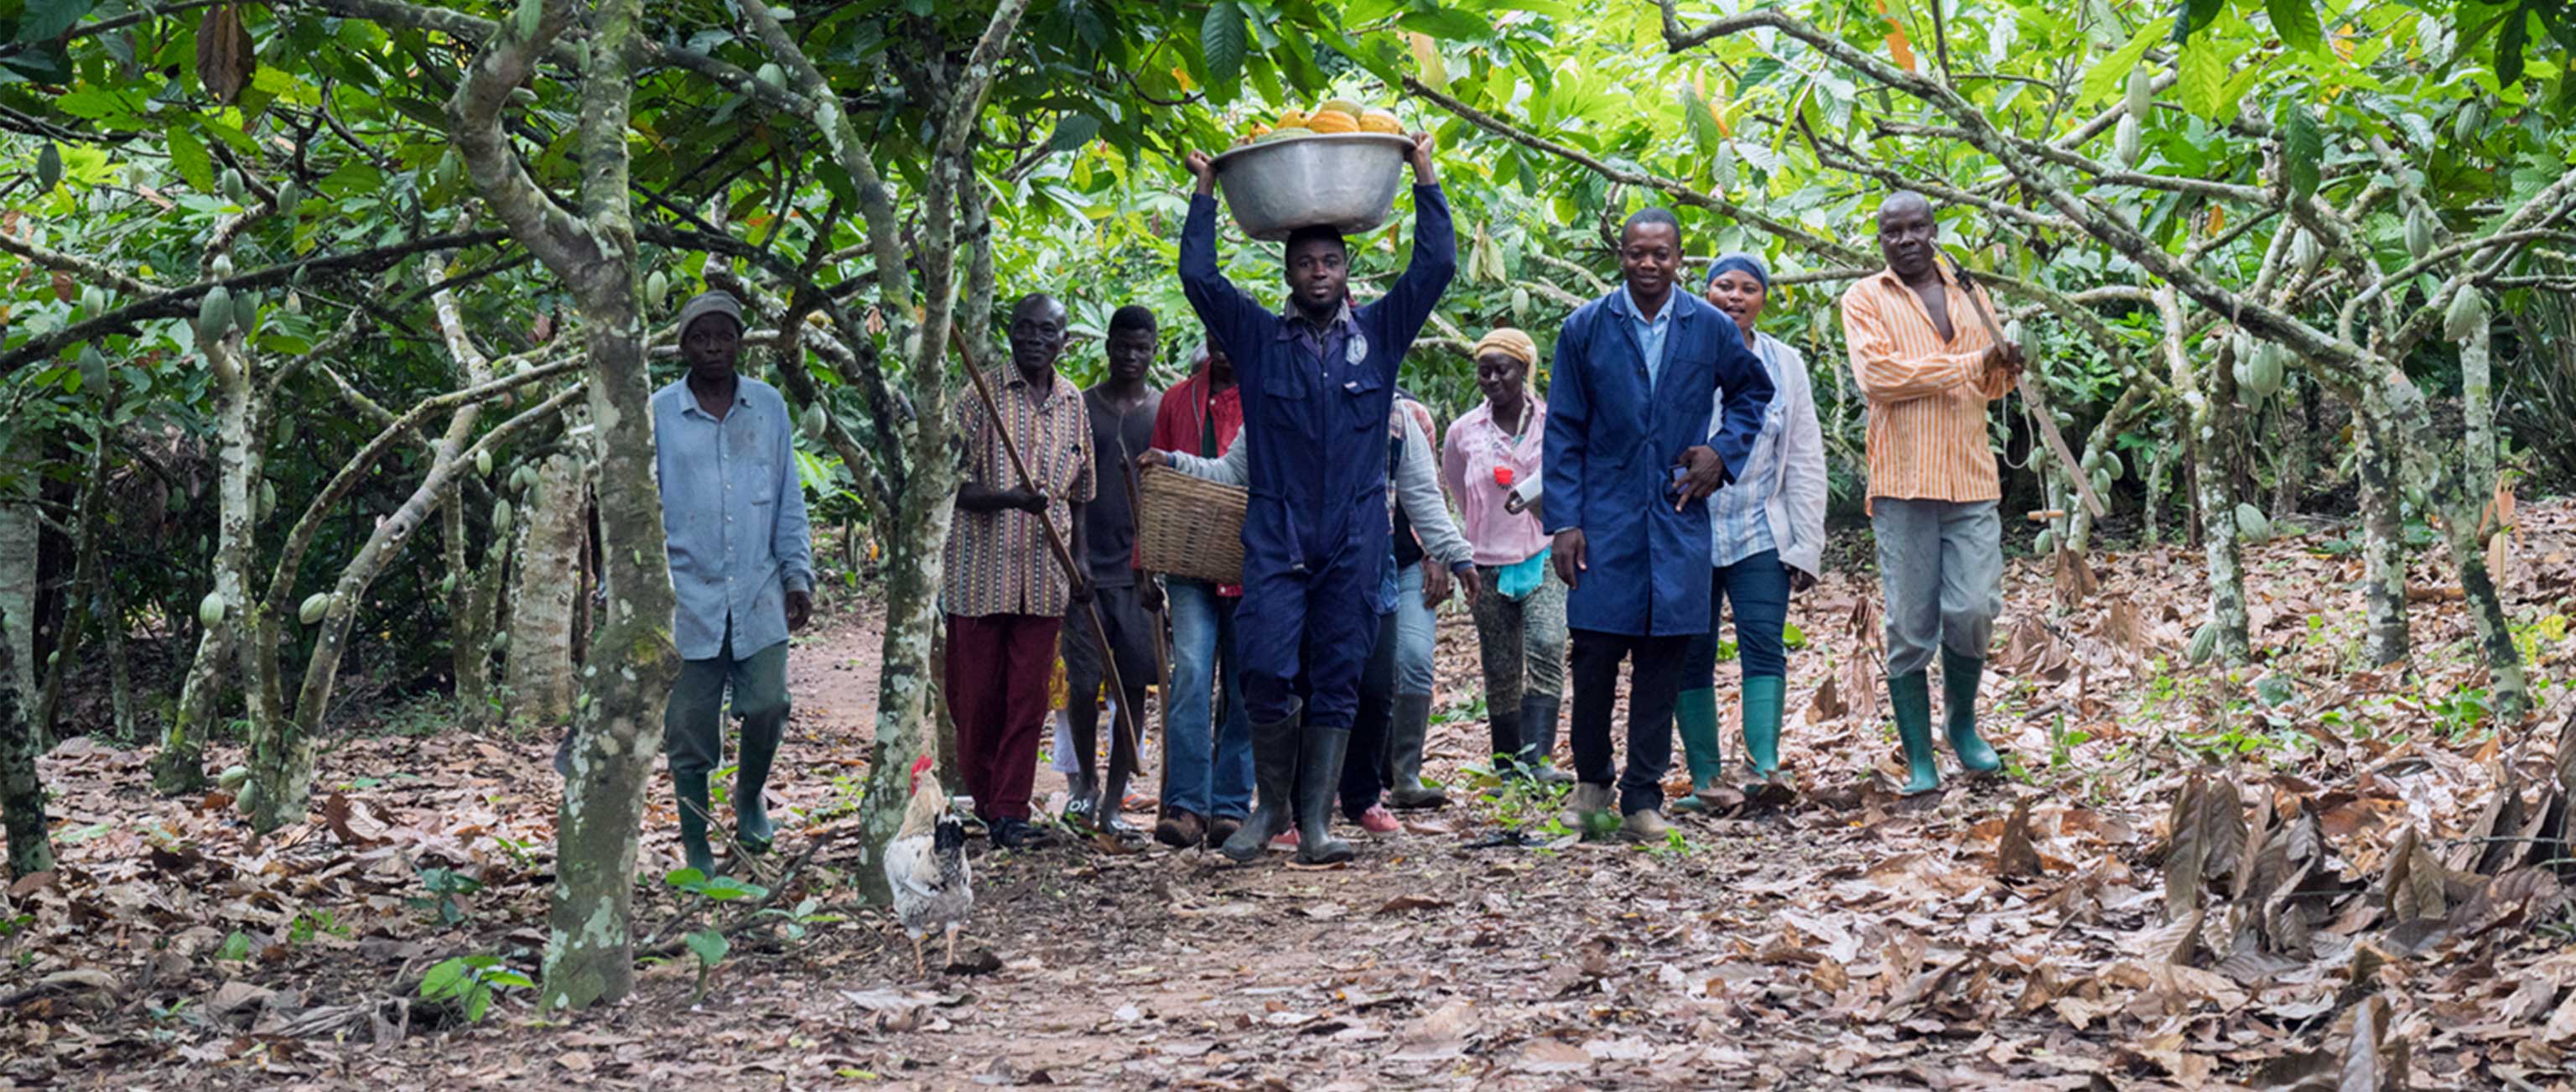 Sustainable Solutions at the Base of the Supply Chain: The Case for Cocoa